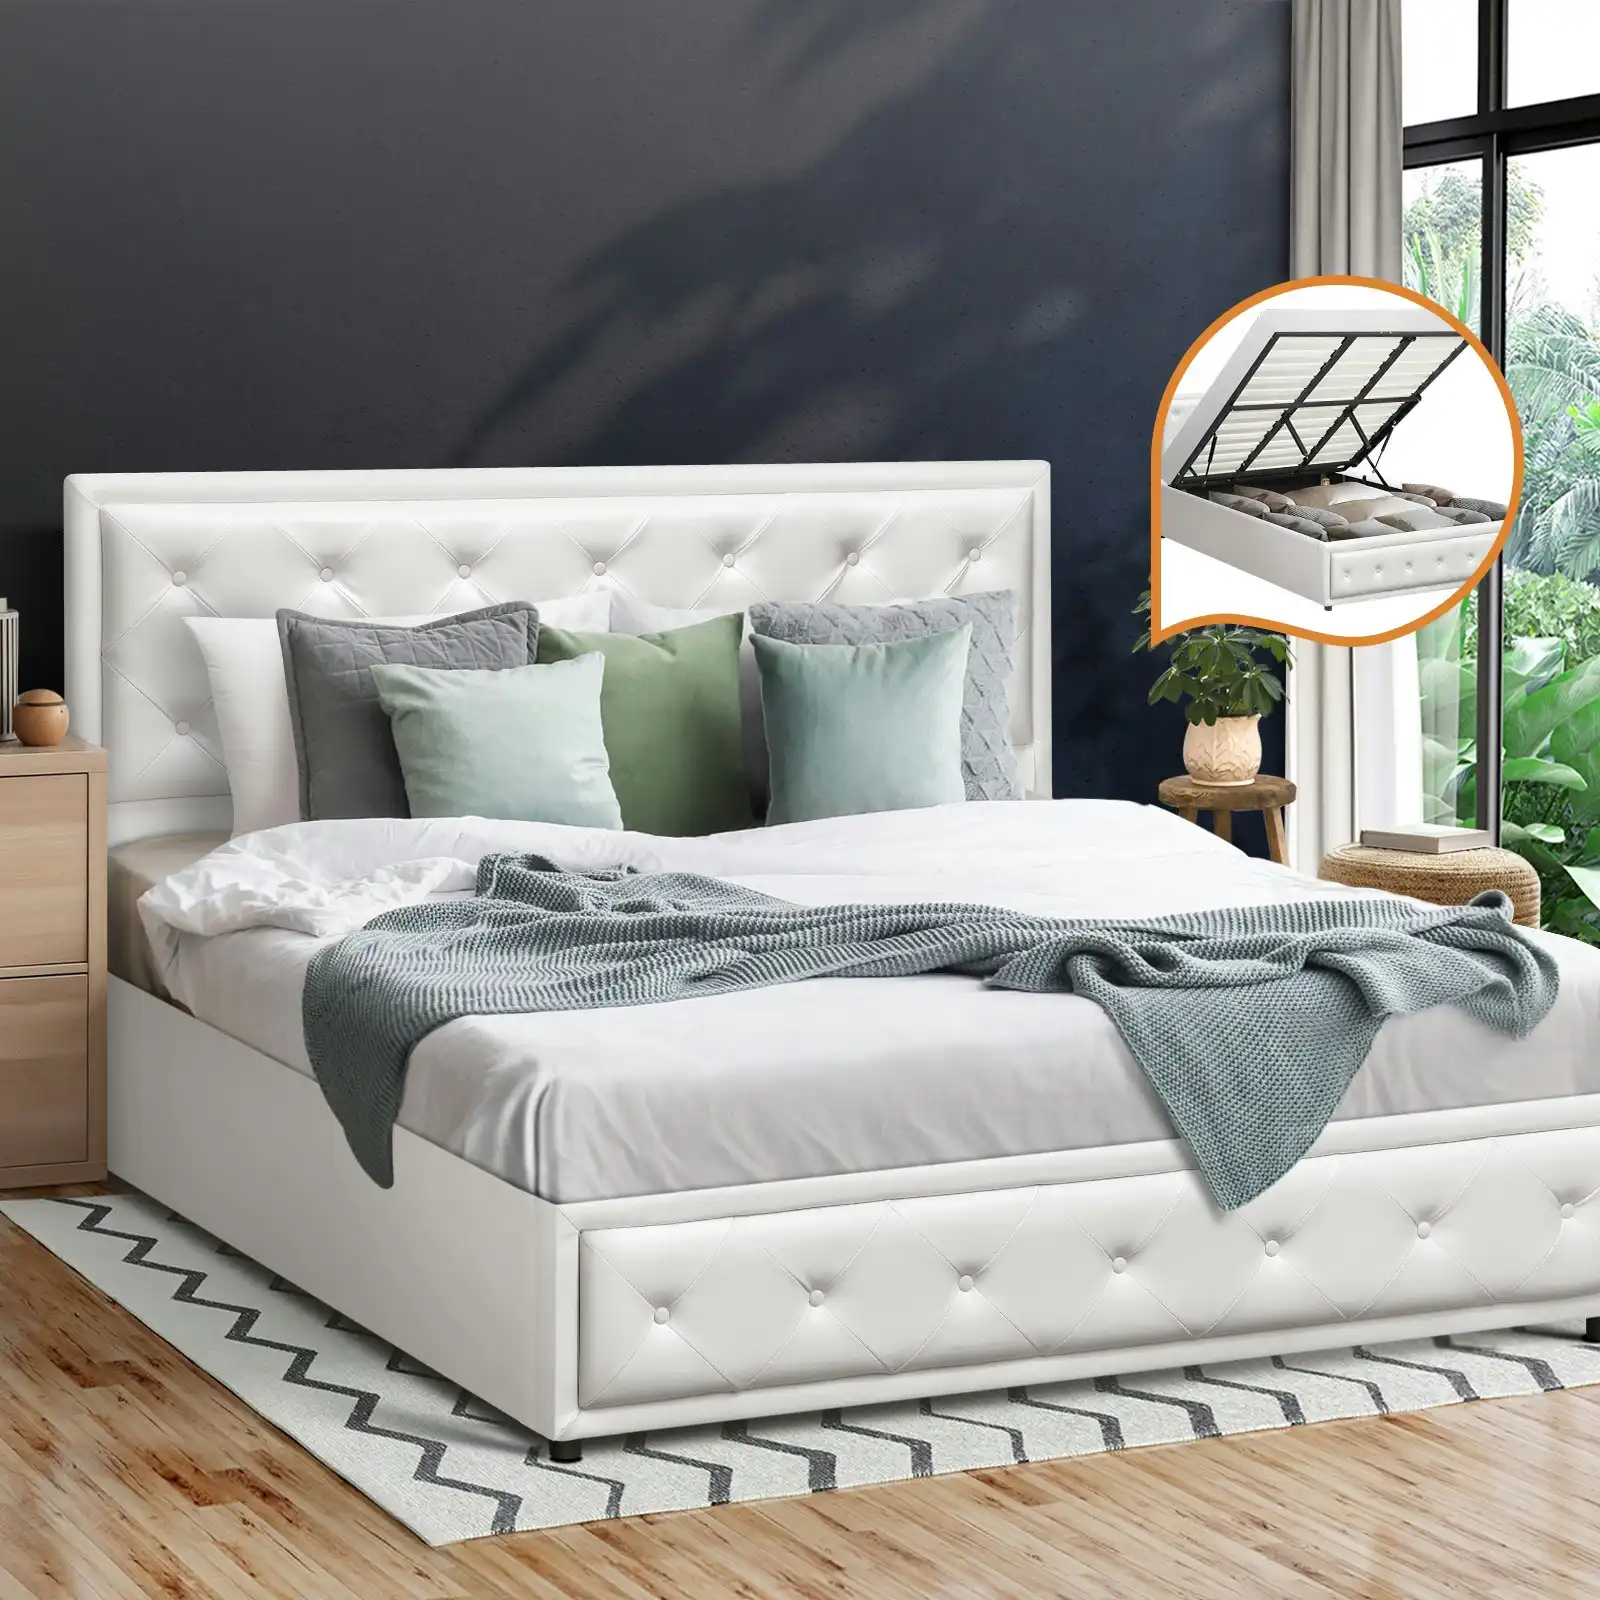 Oikiture Bed Frame King Size Gas Lift Base With Storage White Leather